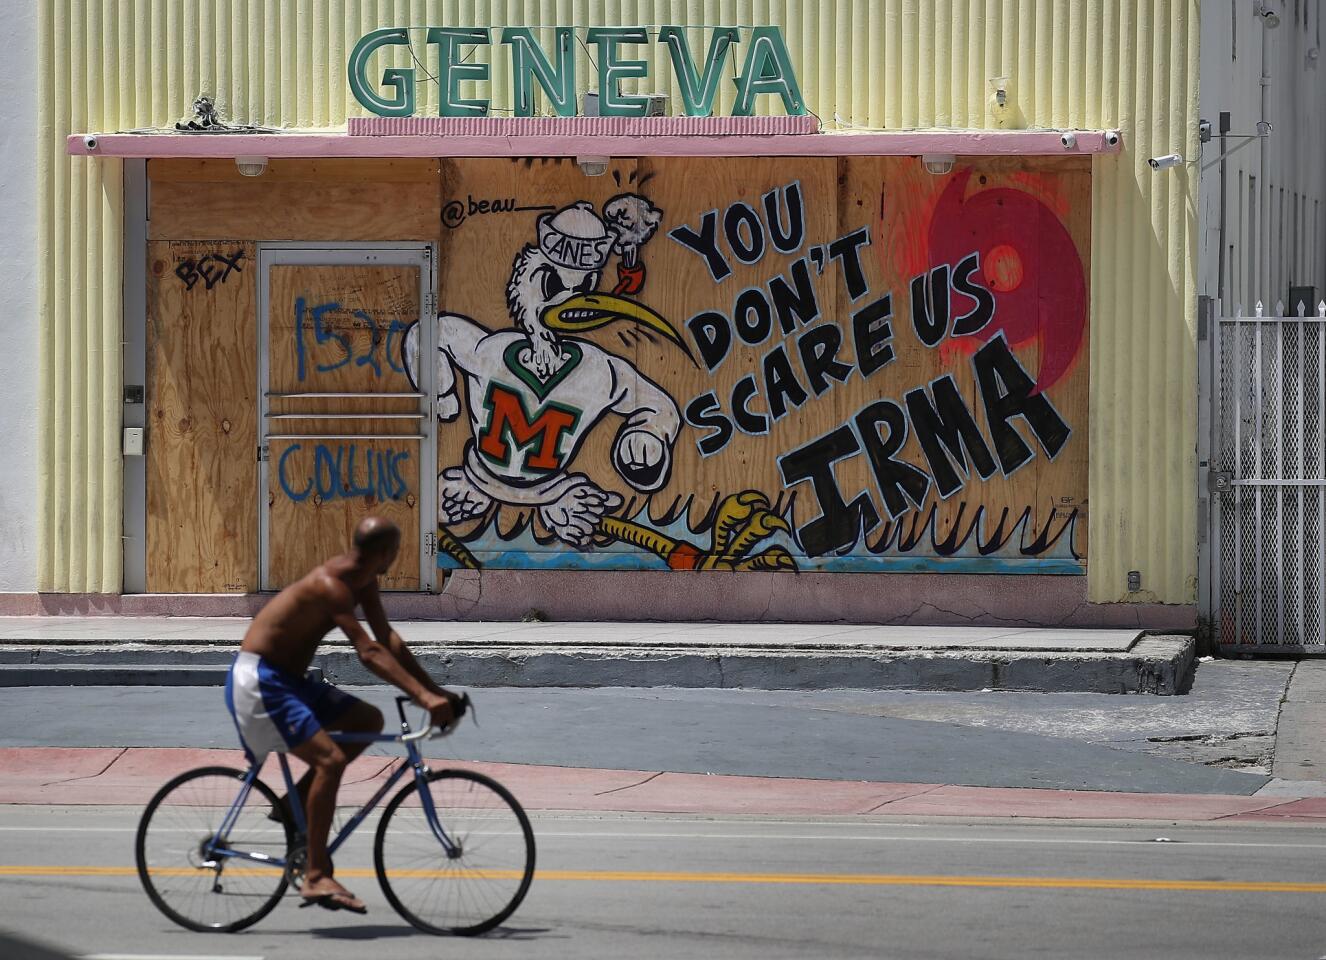 A message reading "You Don't Scare Us Irma" is written on plywood being used to cover the windows of a building as people prepare for the arrival of Hurricane Irma on Sept. 8, 2017 in Miami Beach, Fla.